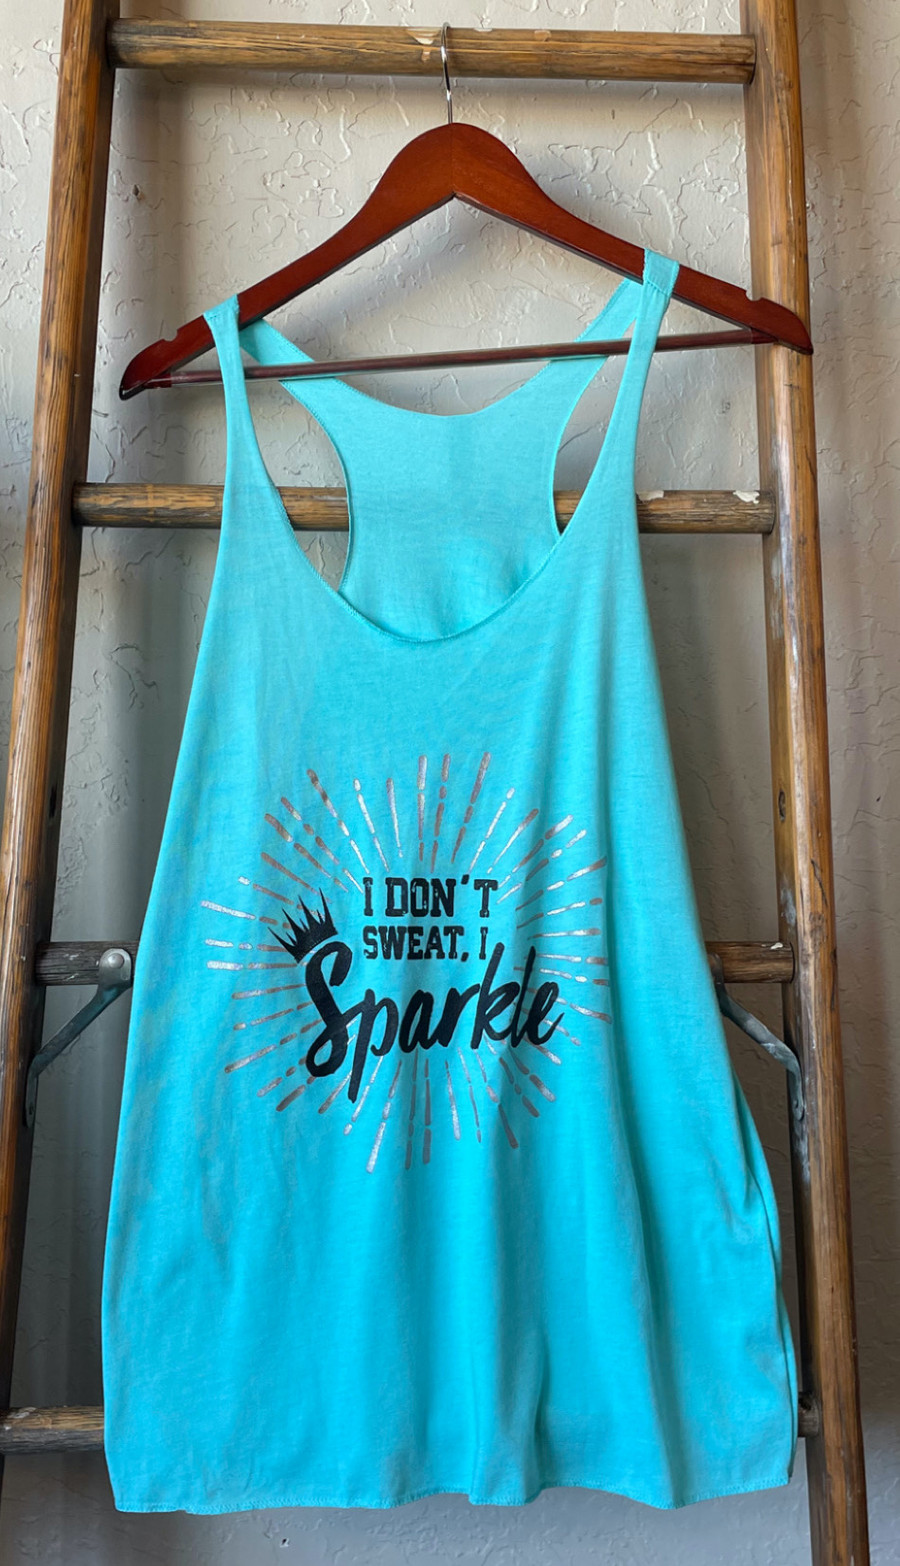 I Don't Sweat, I Sparkle Graphic Tank Top - Cancun Blue